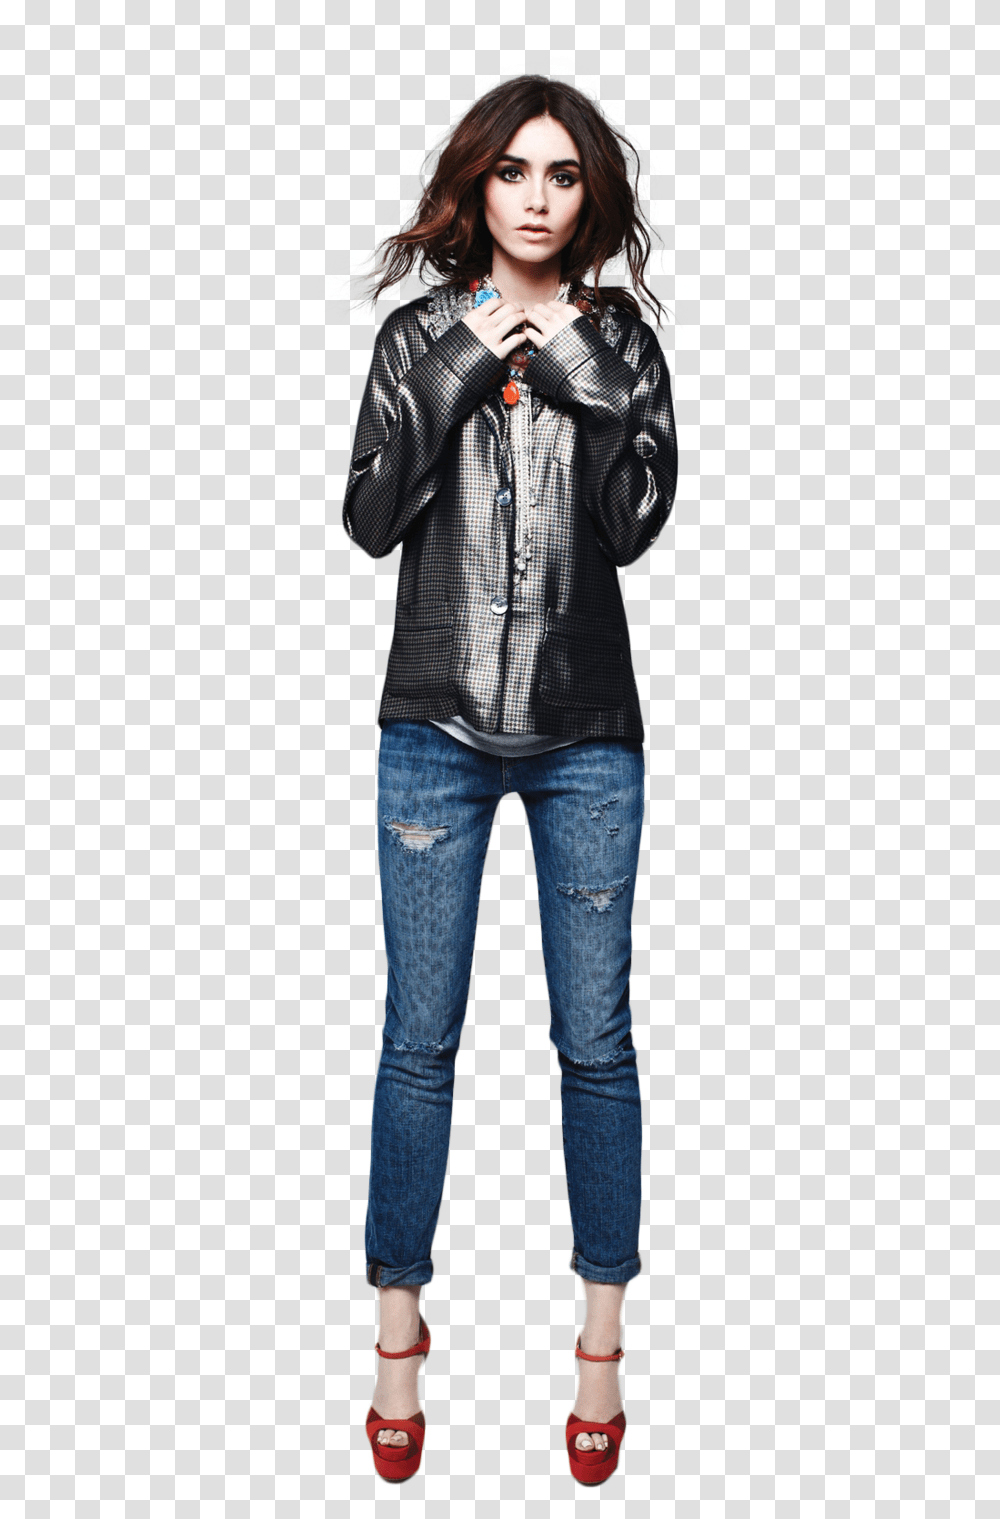 Lily Collins Actress And Clary Fray Image Clary Fray Lily Collins, Pants, Apparel, Jeans Transparent Png